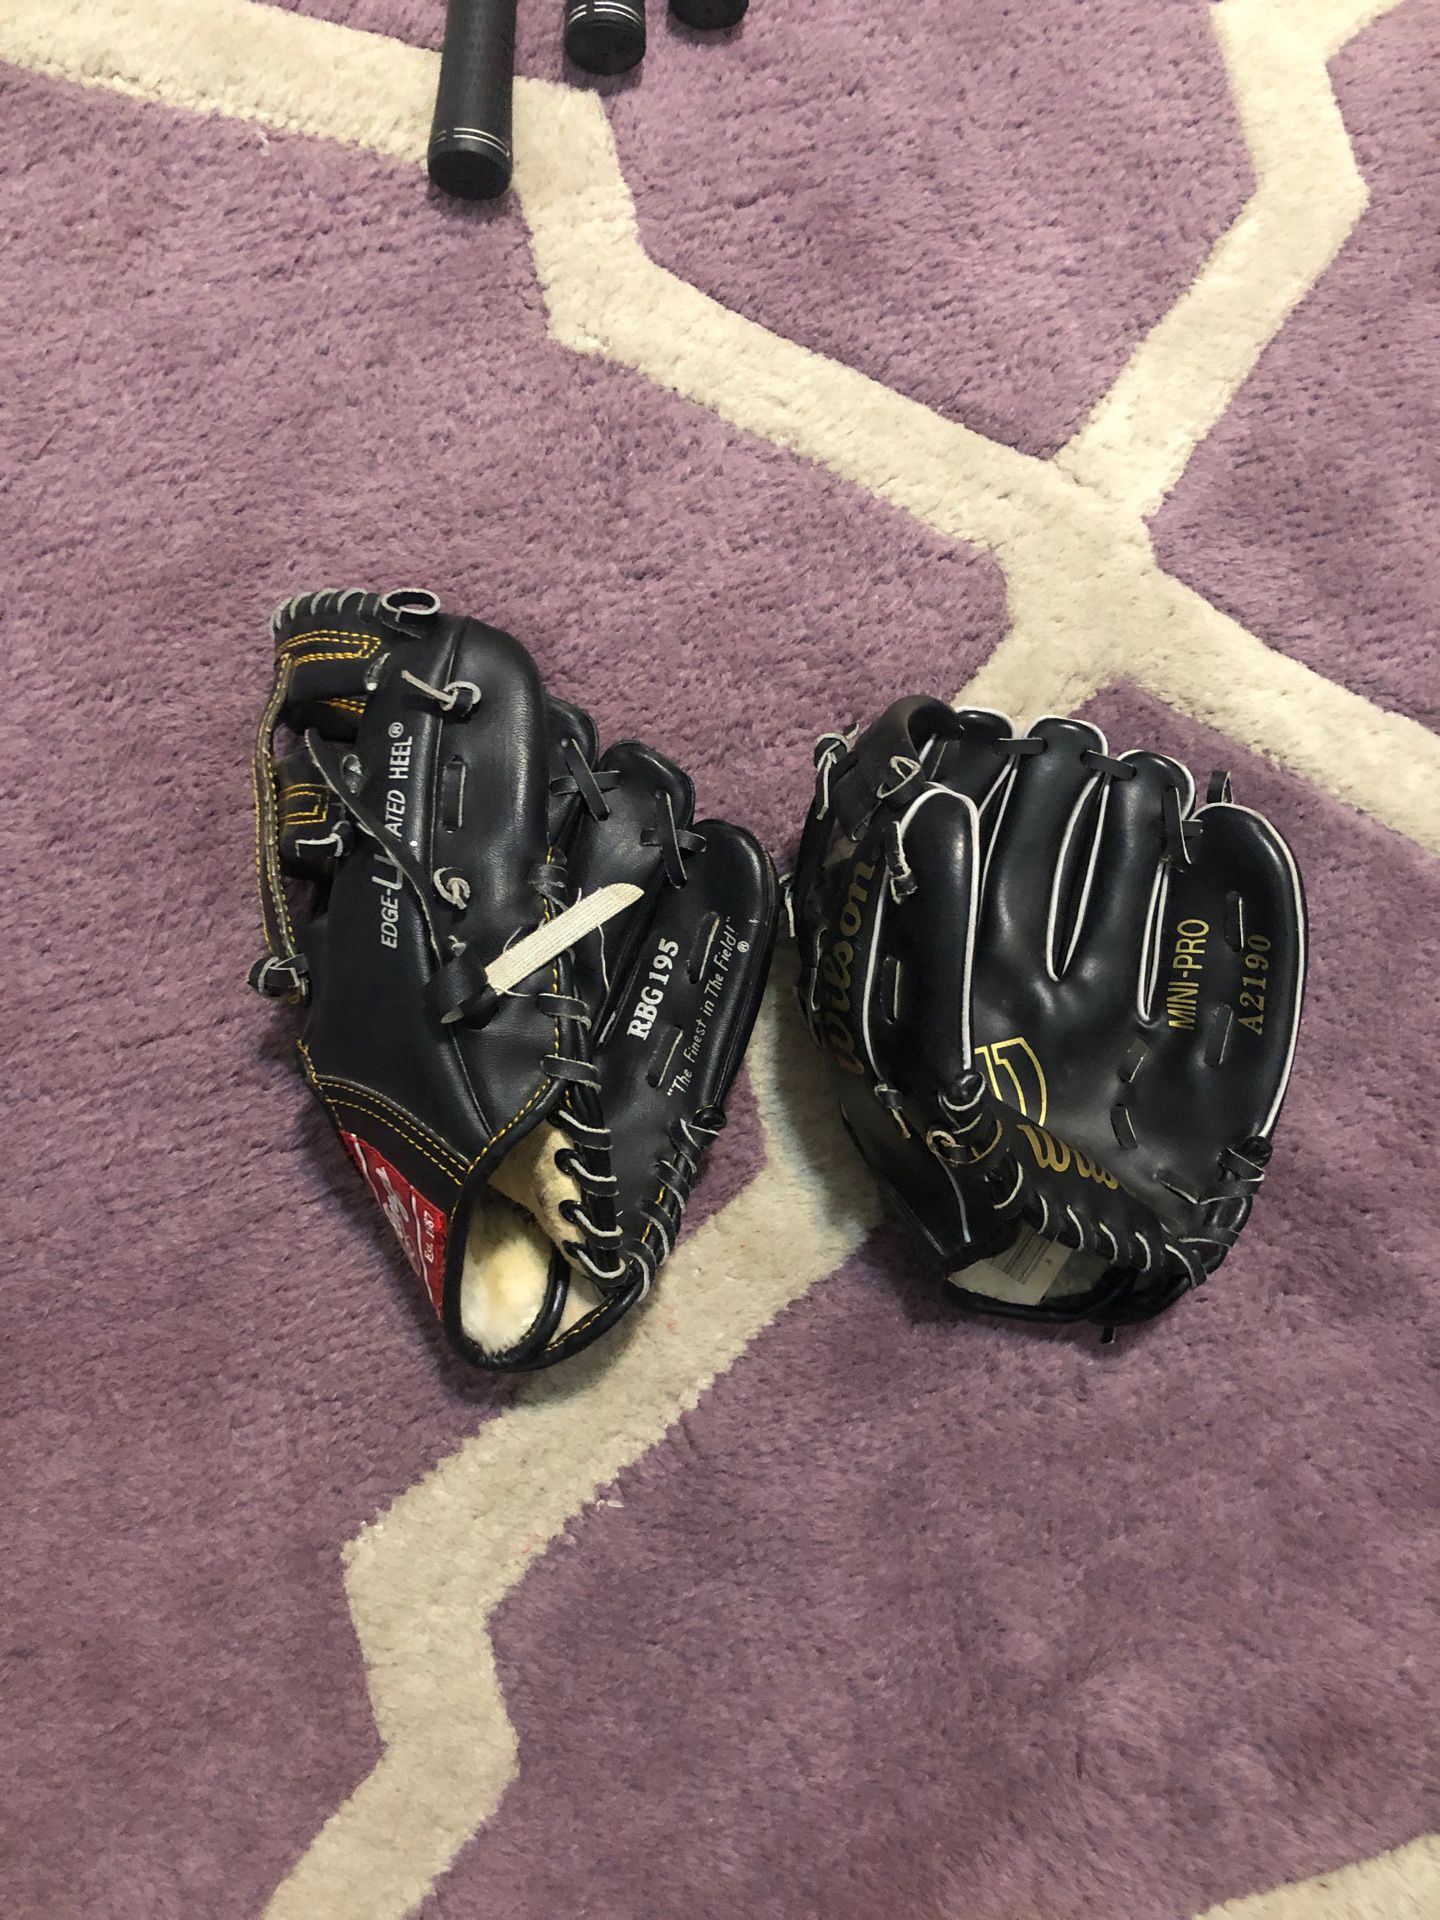 2 childs baseball gloves rawlings and wilson